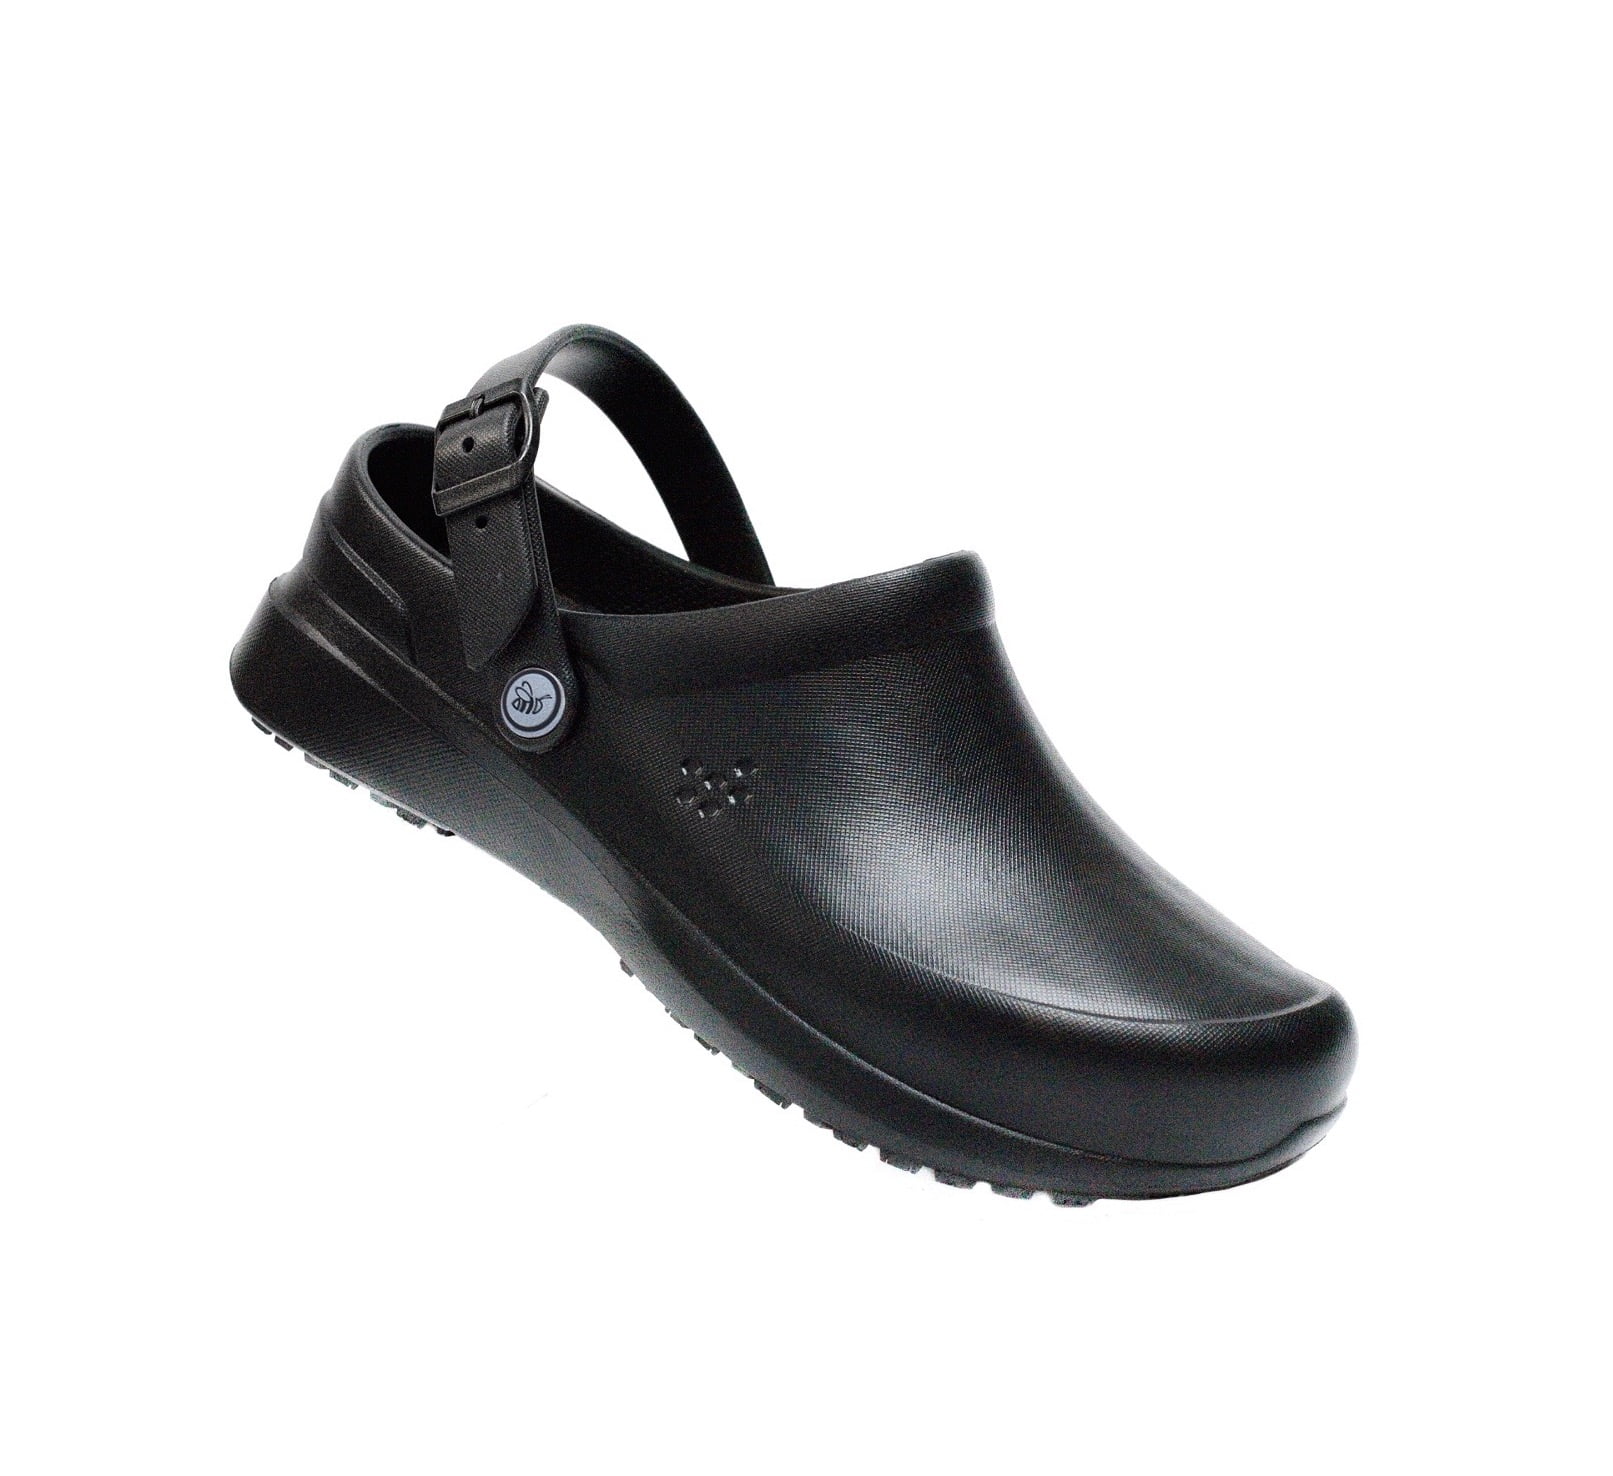 Joybees Work Clog - Slip Resistant, Supportive and Comfortable ...